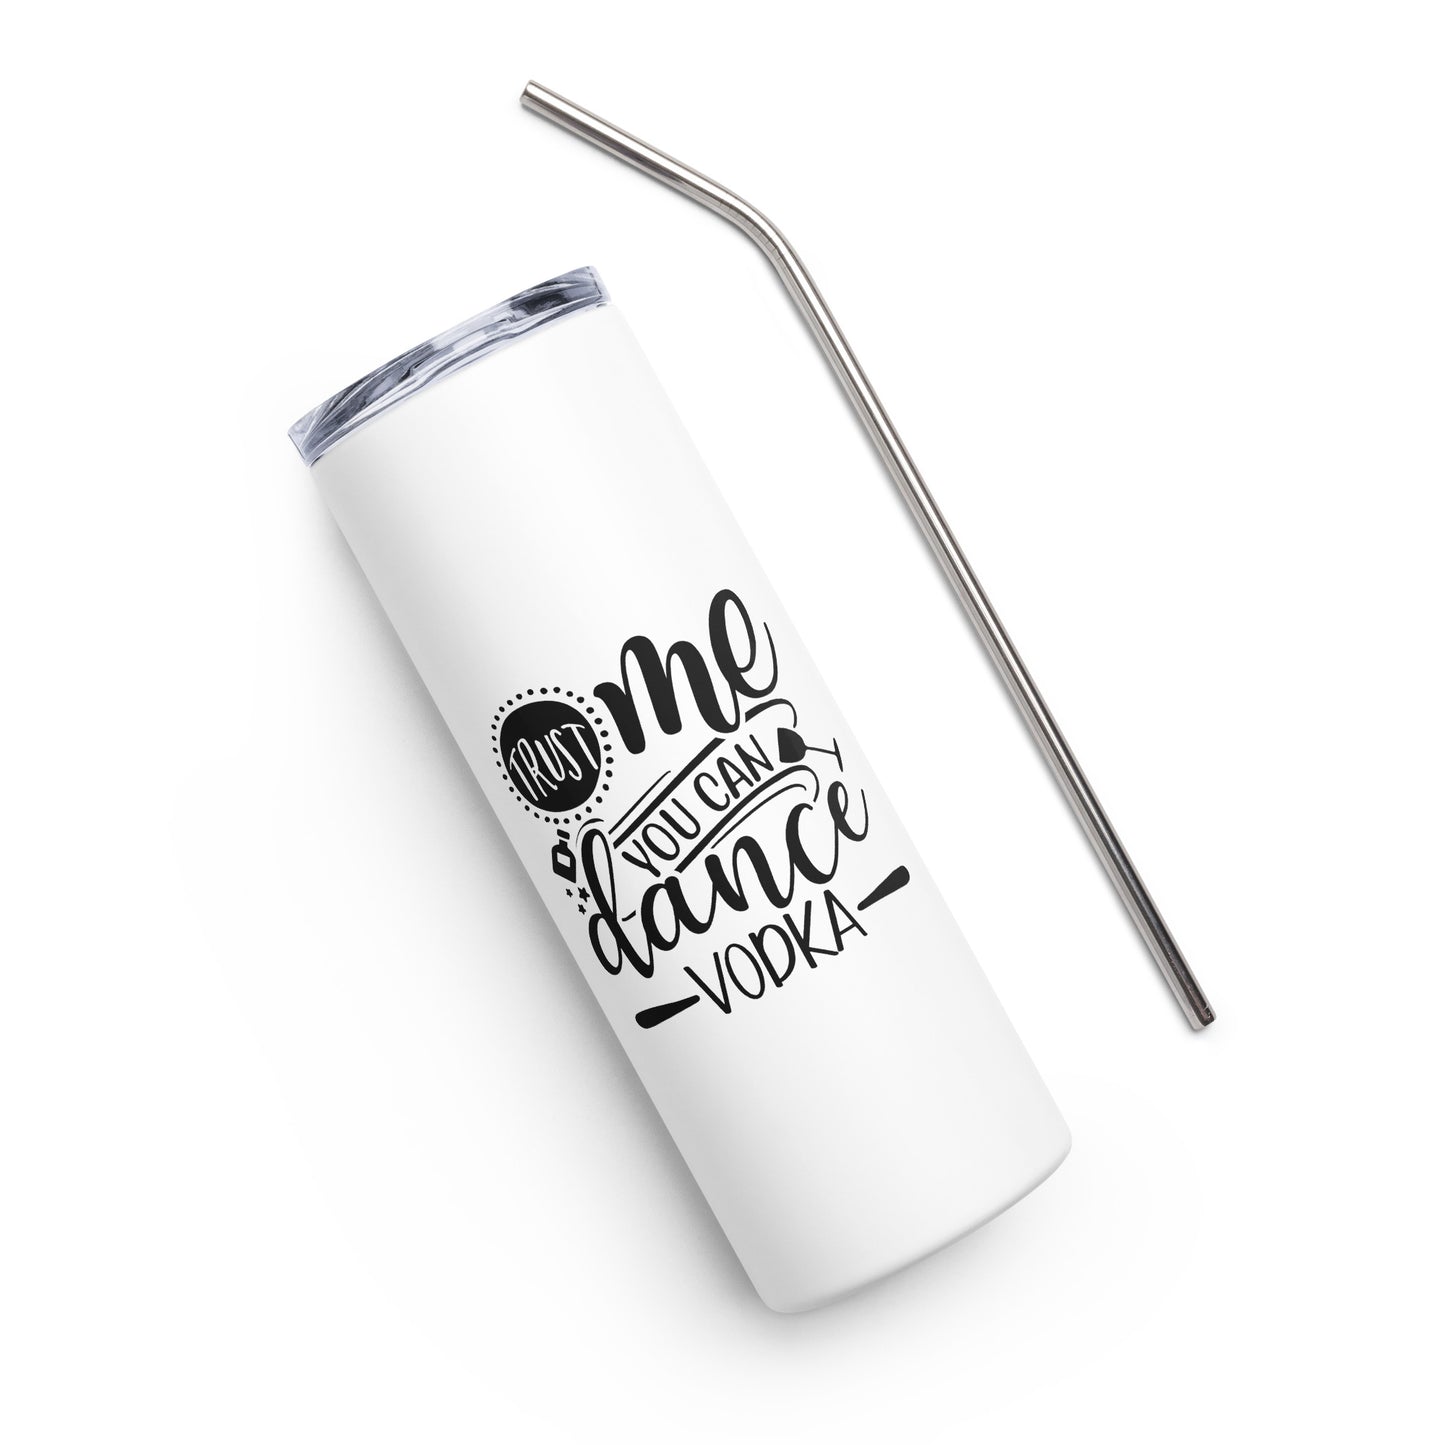 Trust Me You Can Dance Vodka Stainless steel tumbler